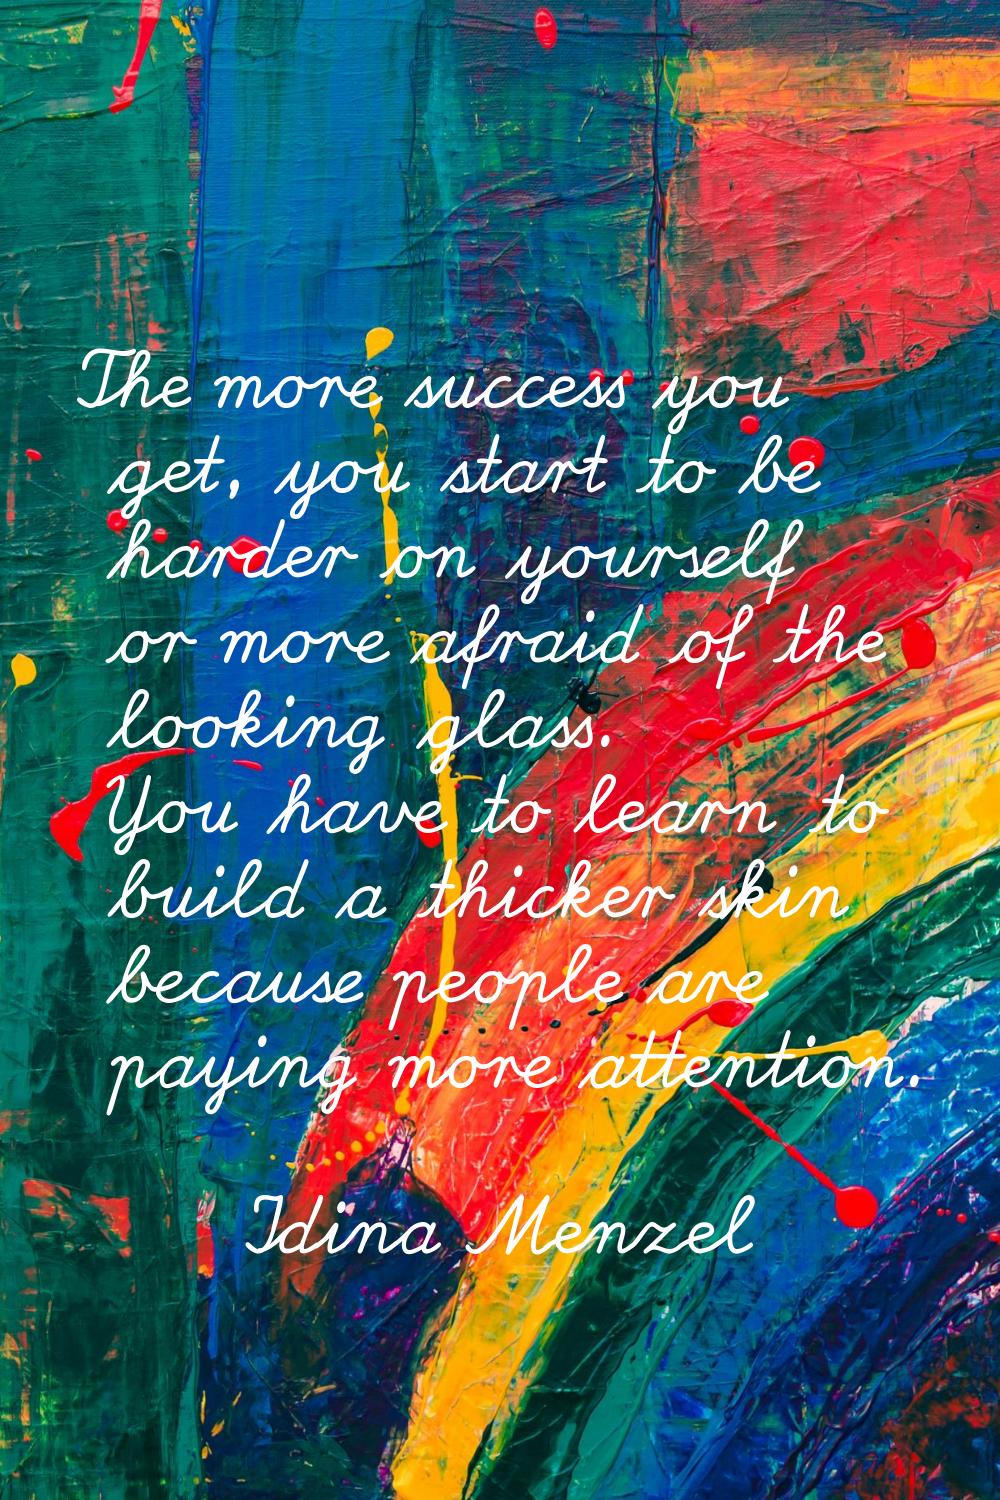 The more success you get, you start to be harder on yourself or more afraid of the looking glass. Y